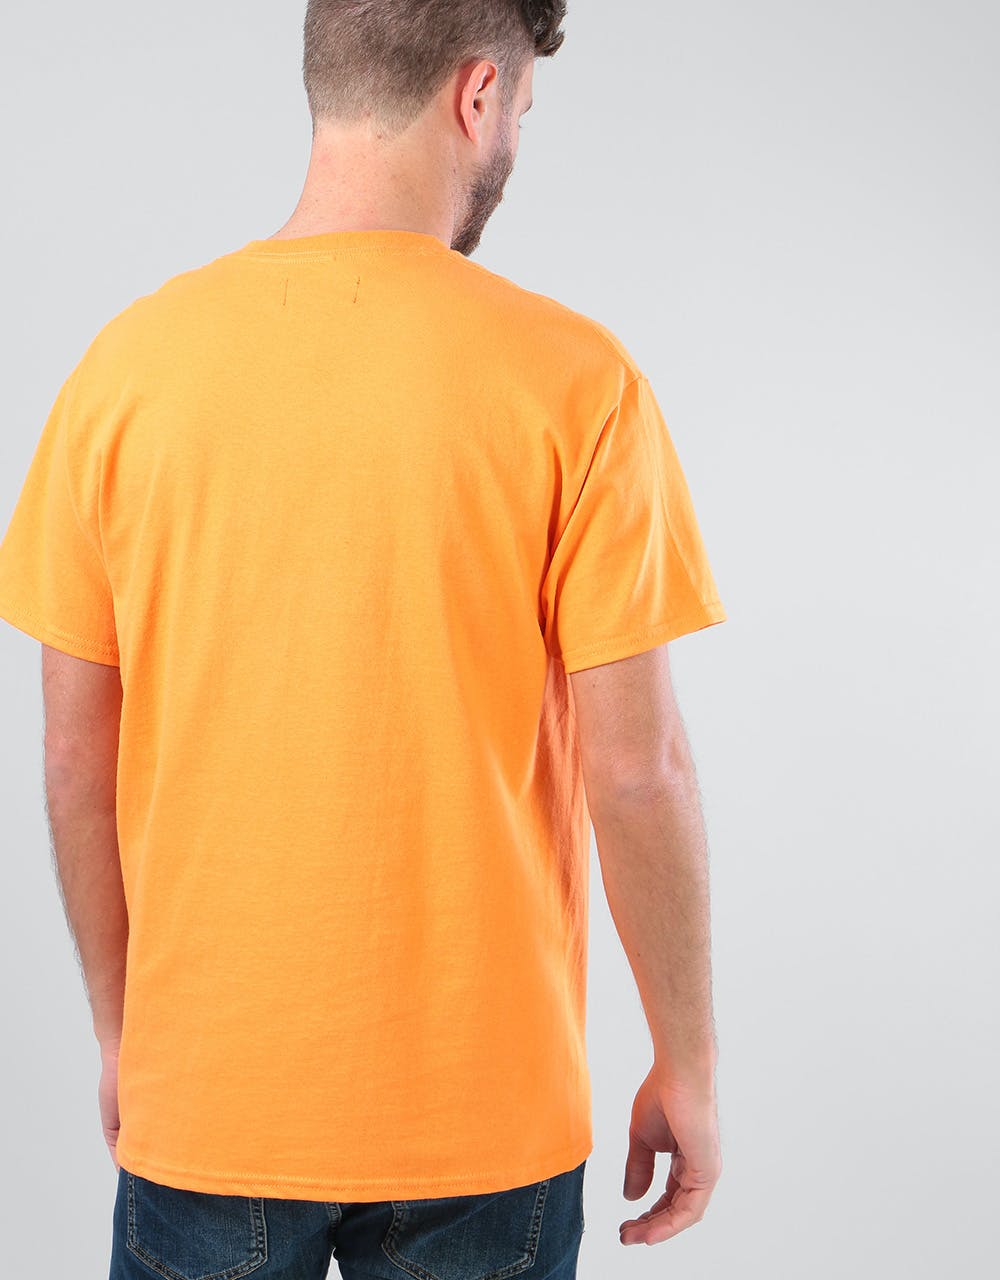 Route One Embroidered Logo T-Shirt - Tangerine